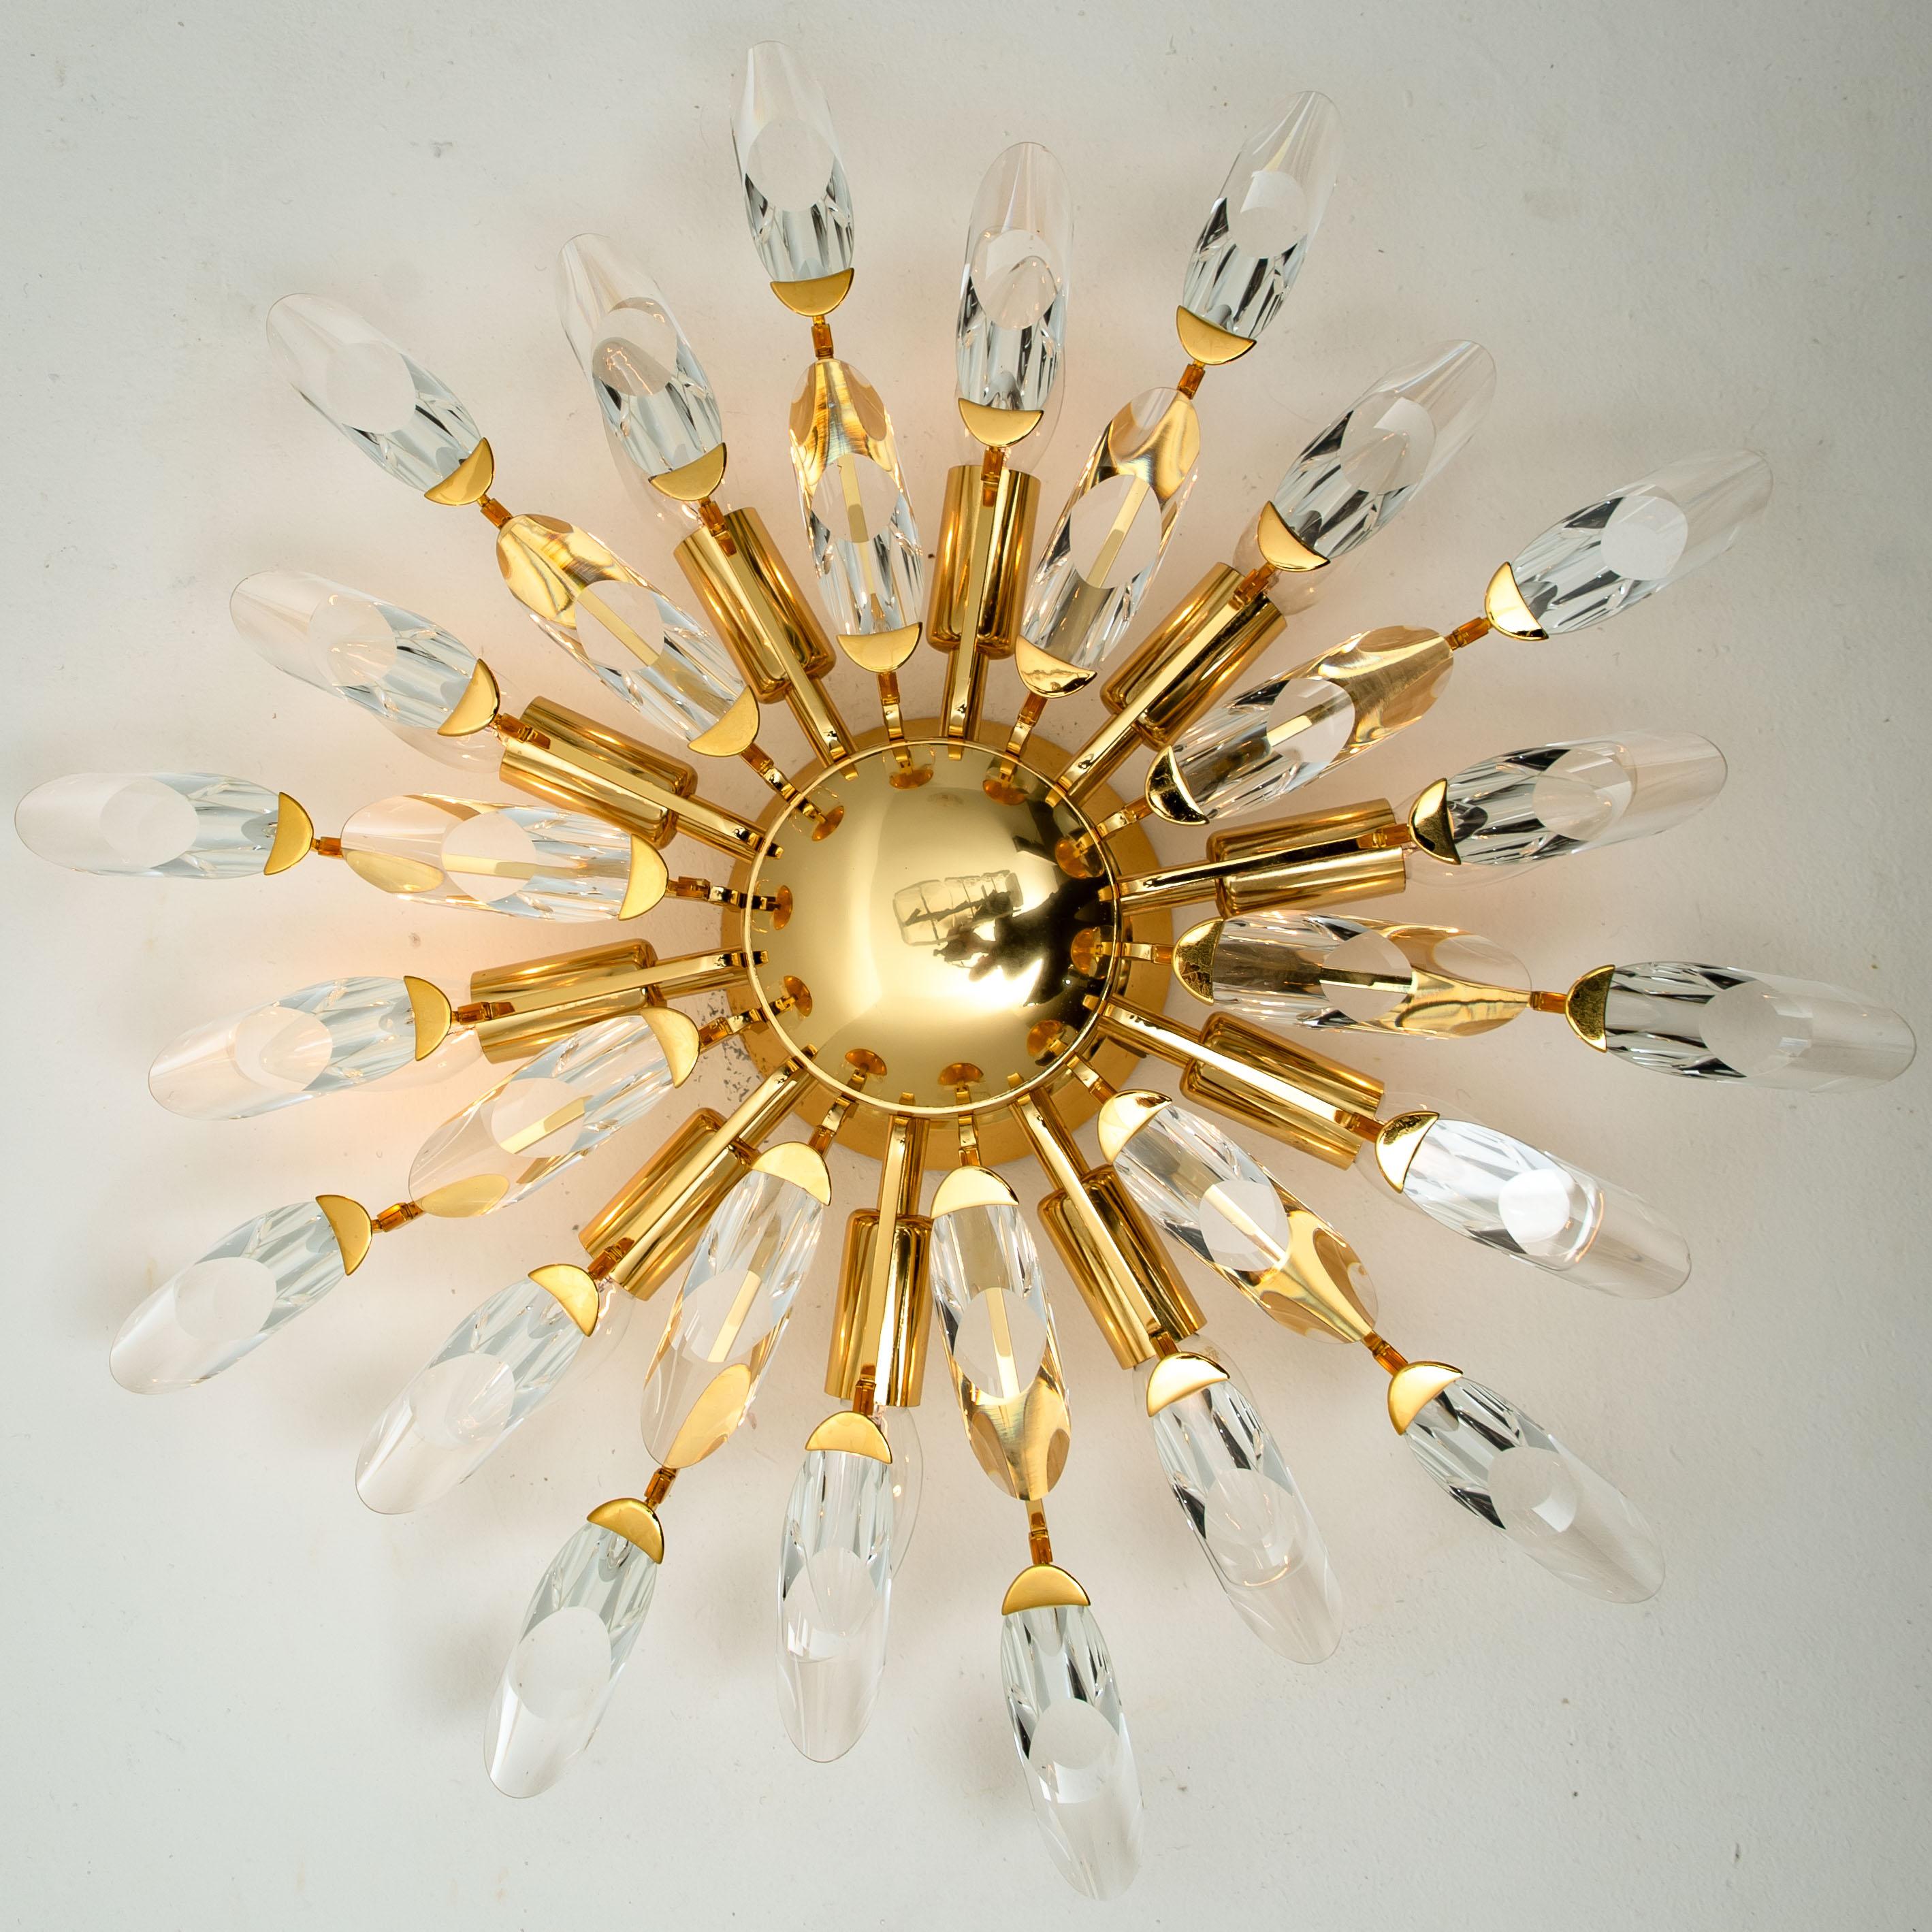 High-end gilded brass flushmount by Stilkronen, made in Italy, circa 1975, featuring a sunburst array of branches holding 30 clear crystals pieces. The crystals refract light beautifully and are perfect for a soft, warm and welcoming glow in the